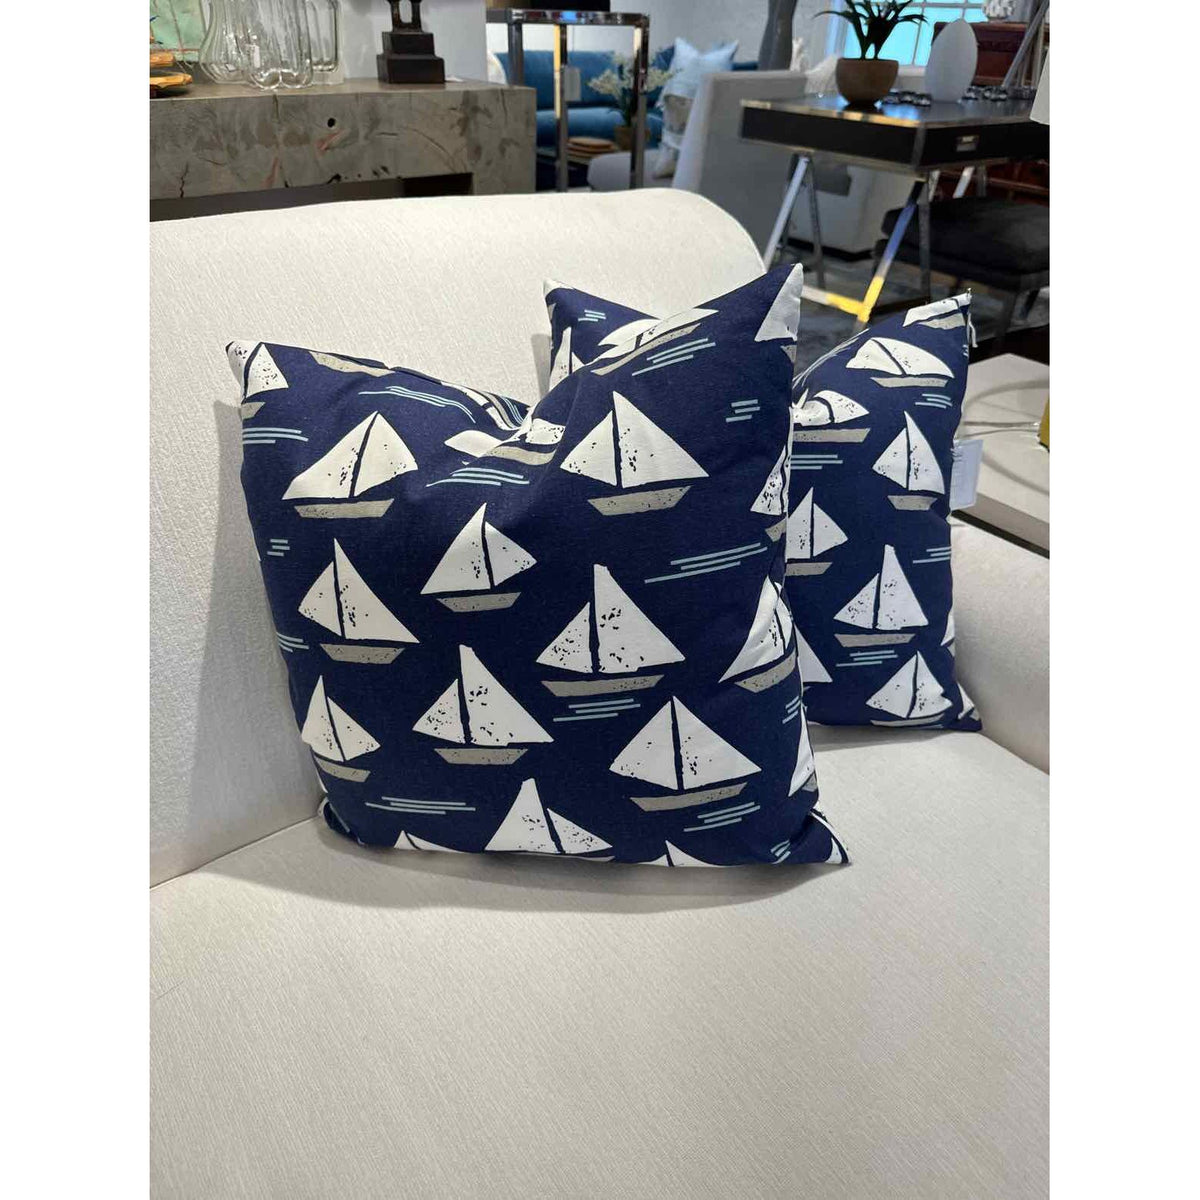 Pair of Sail Boats Over Blue Square Outdoor/Indoor Pillows 18"x18"